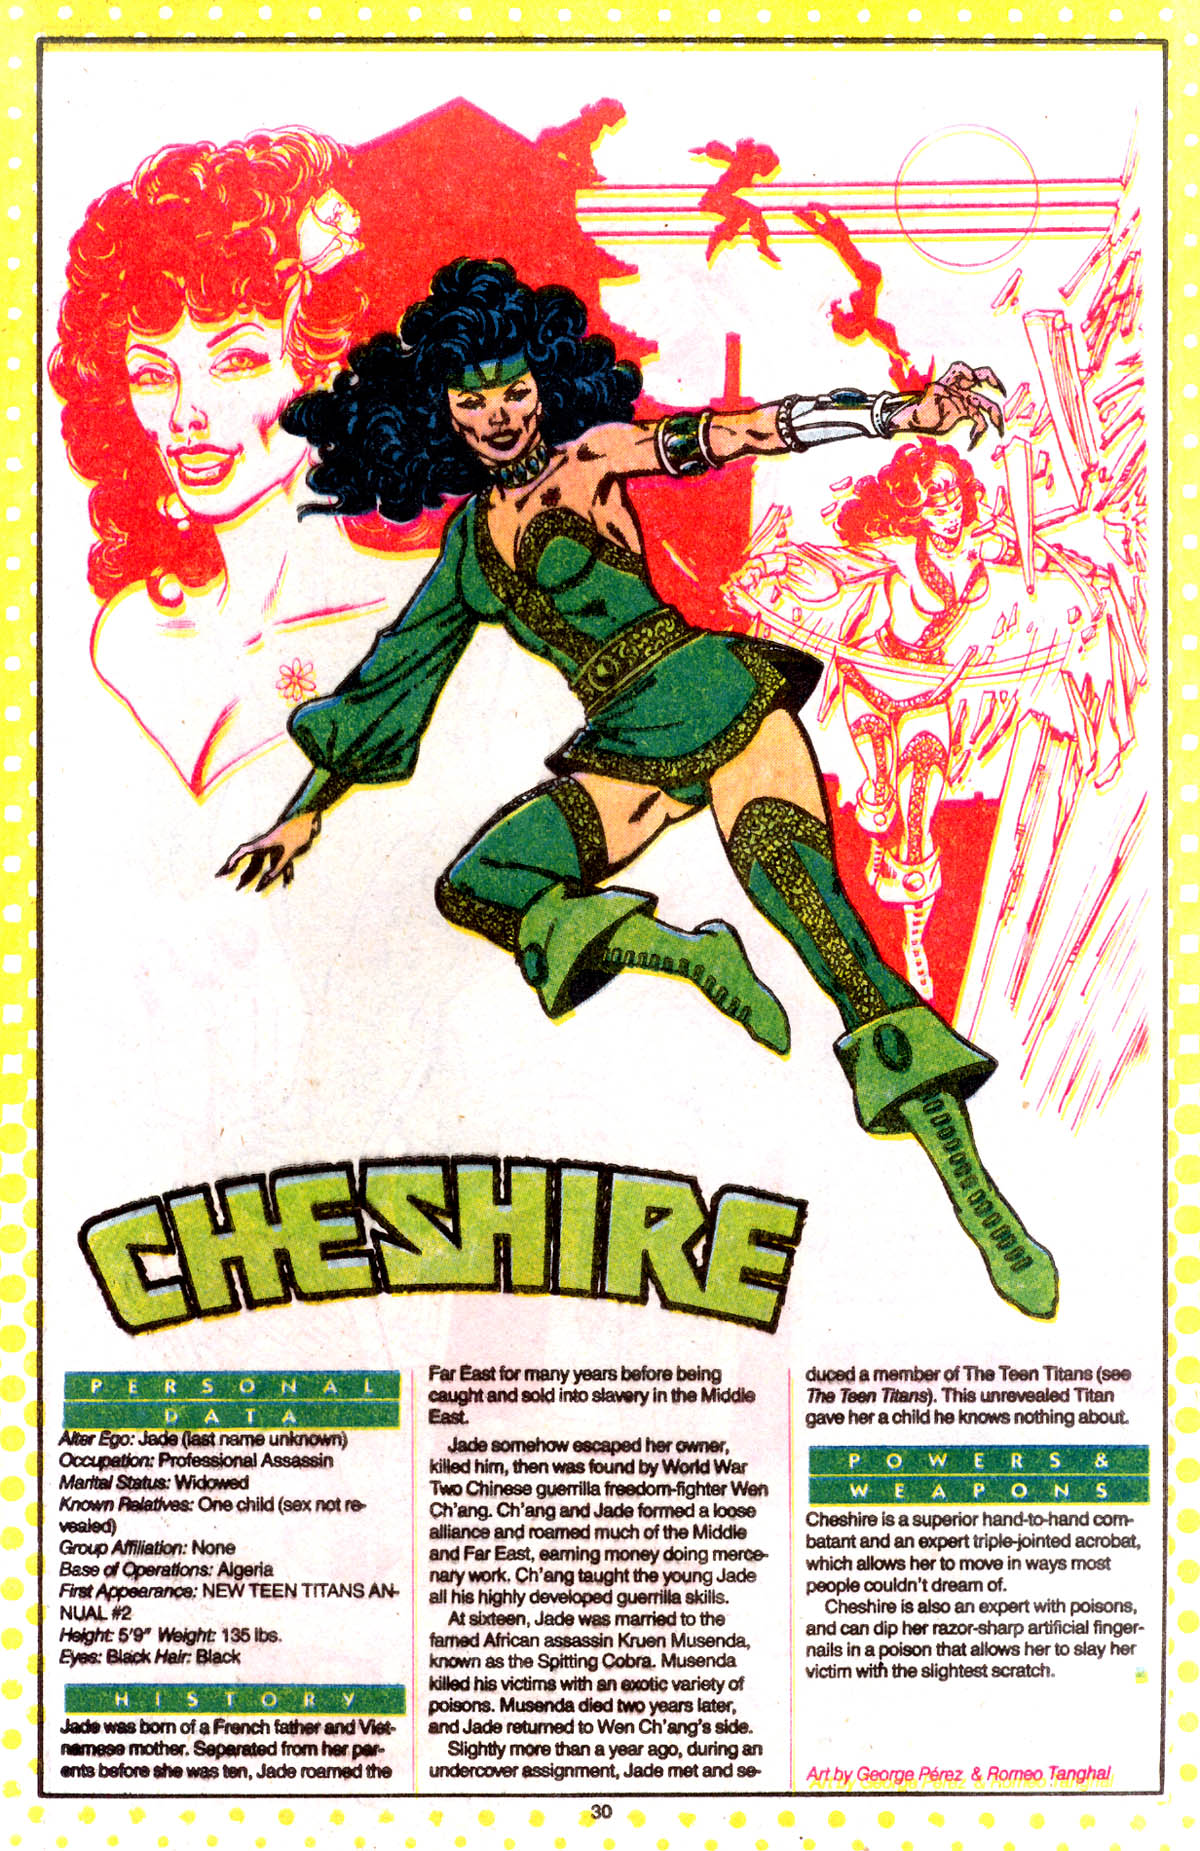 Cheshire by George Perez & Romeo Tanghal - Who's Who: The Definitive Directory of the DC Universe #4